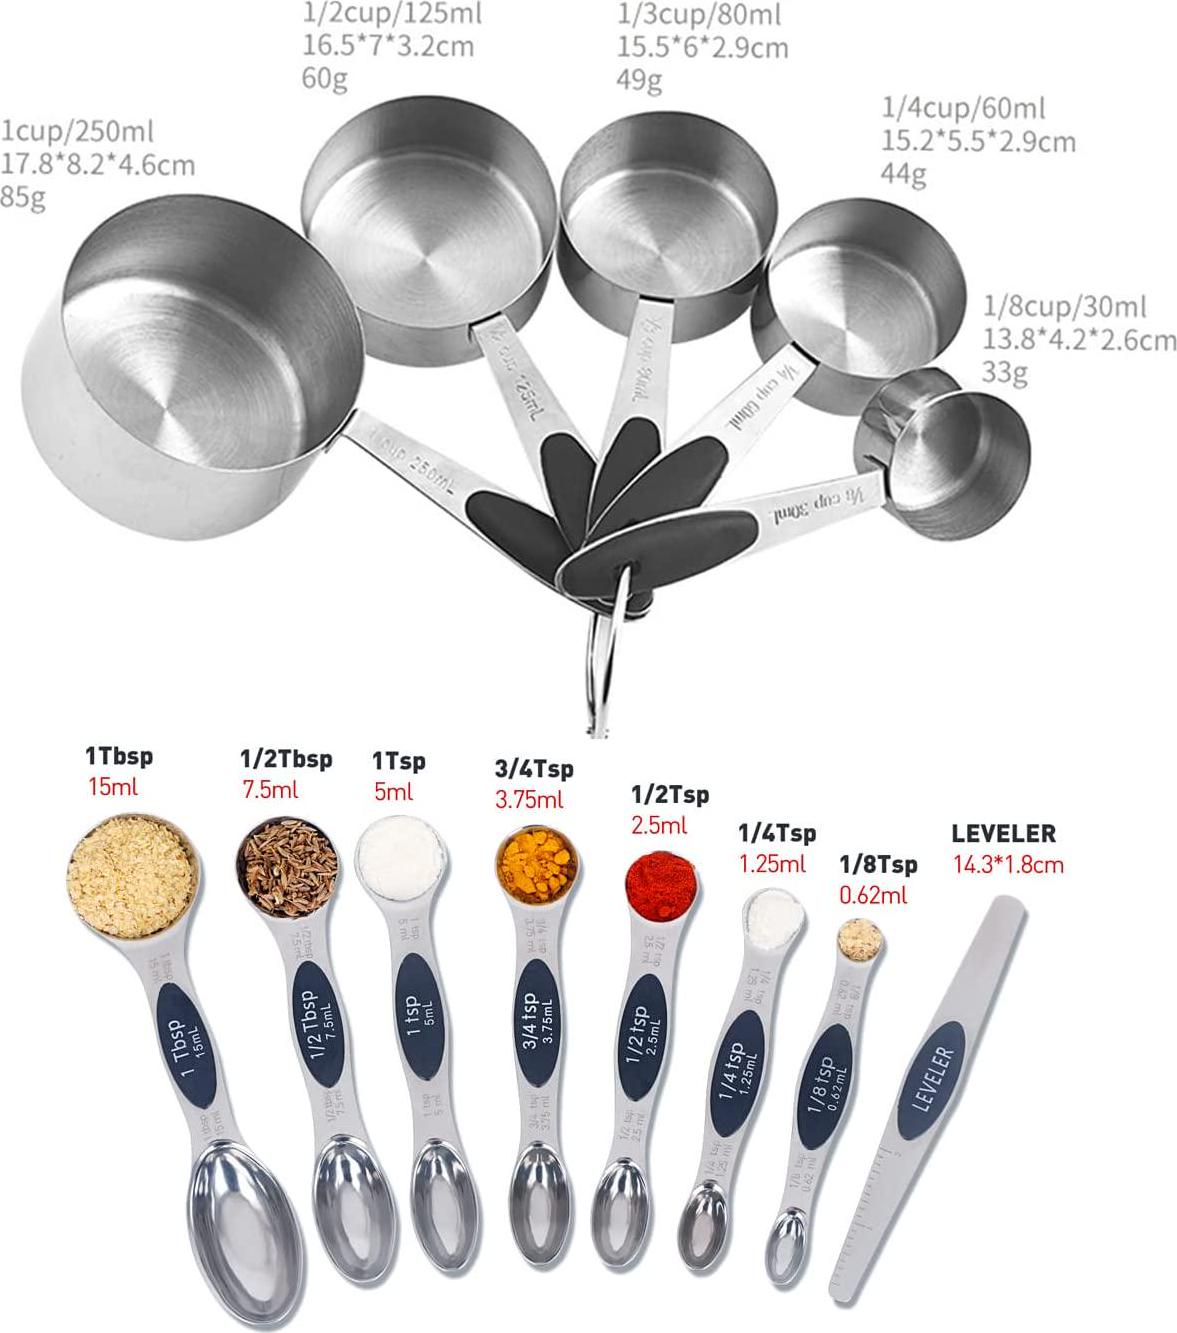 Edelin, EDELIN Measuring Cups and Magnetic Measuring Spoons Set, Stainless Steel 5 Measuring Cups, 7 Double Sided Stackable Magnetic Measuring Spoons, 1 Level, Set of 13 for Dry and Liquid Ingredients